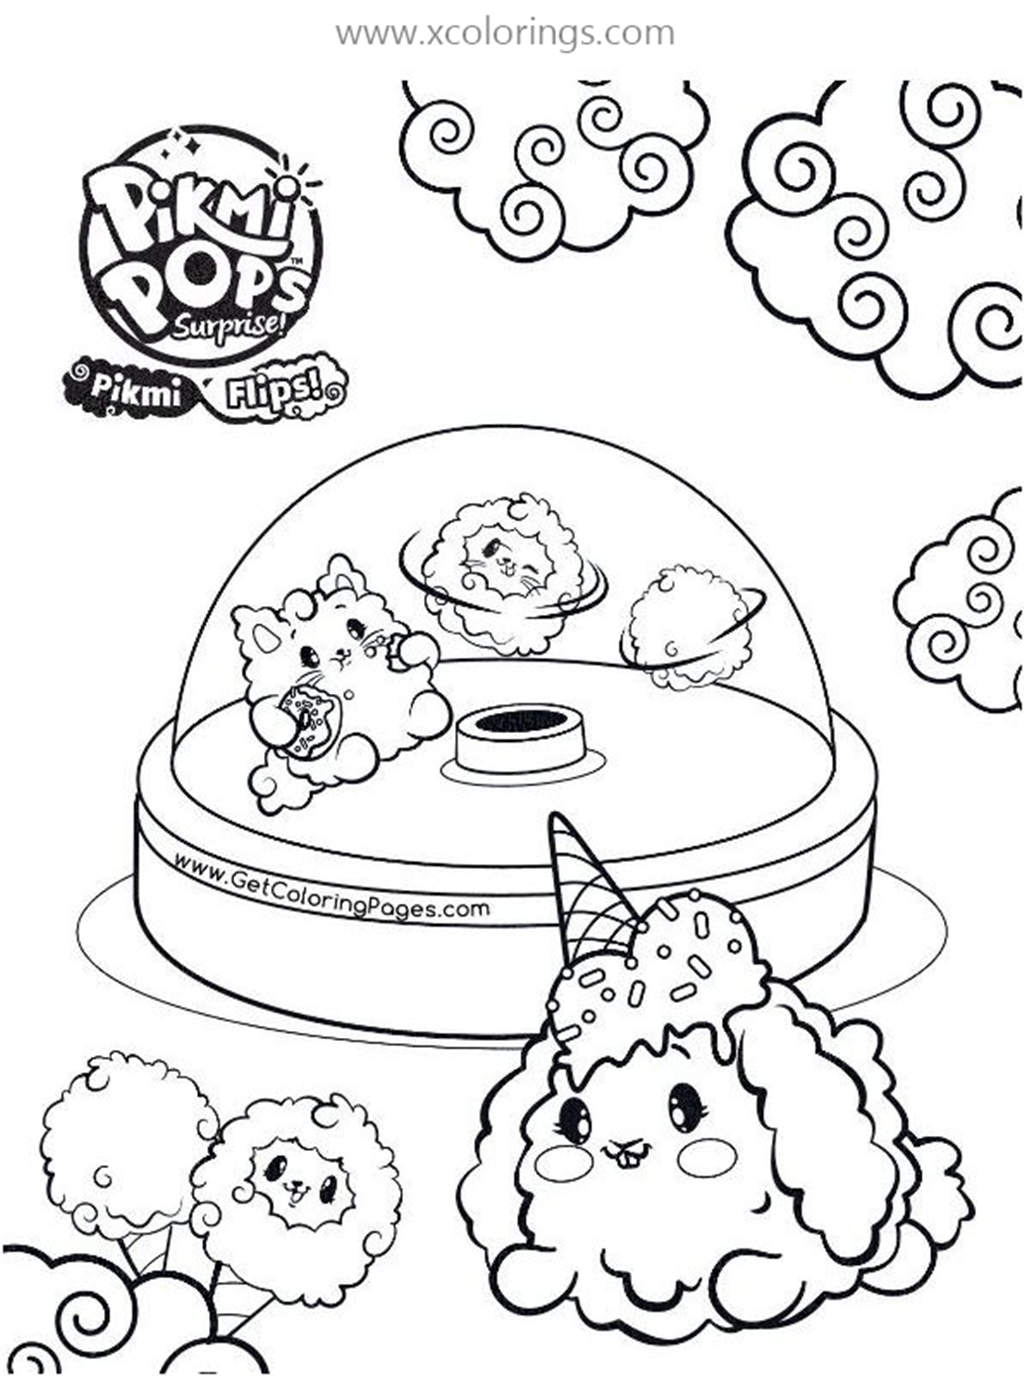 Free Kawaii Pikmi Pops Coloring Pages printable